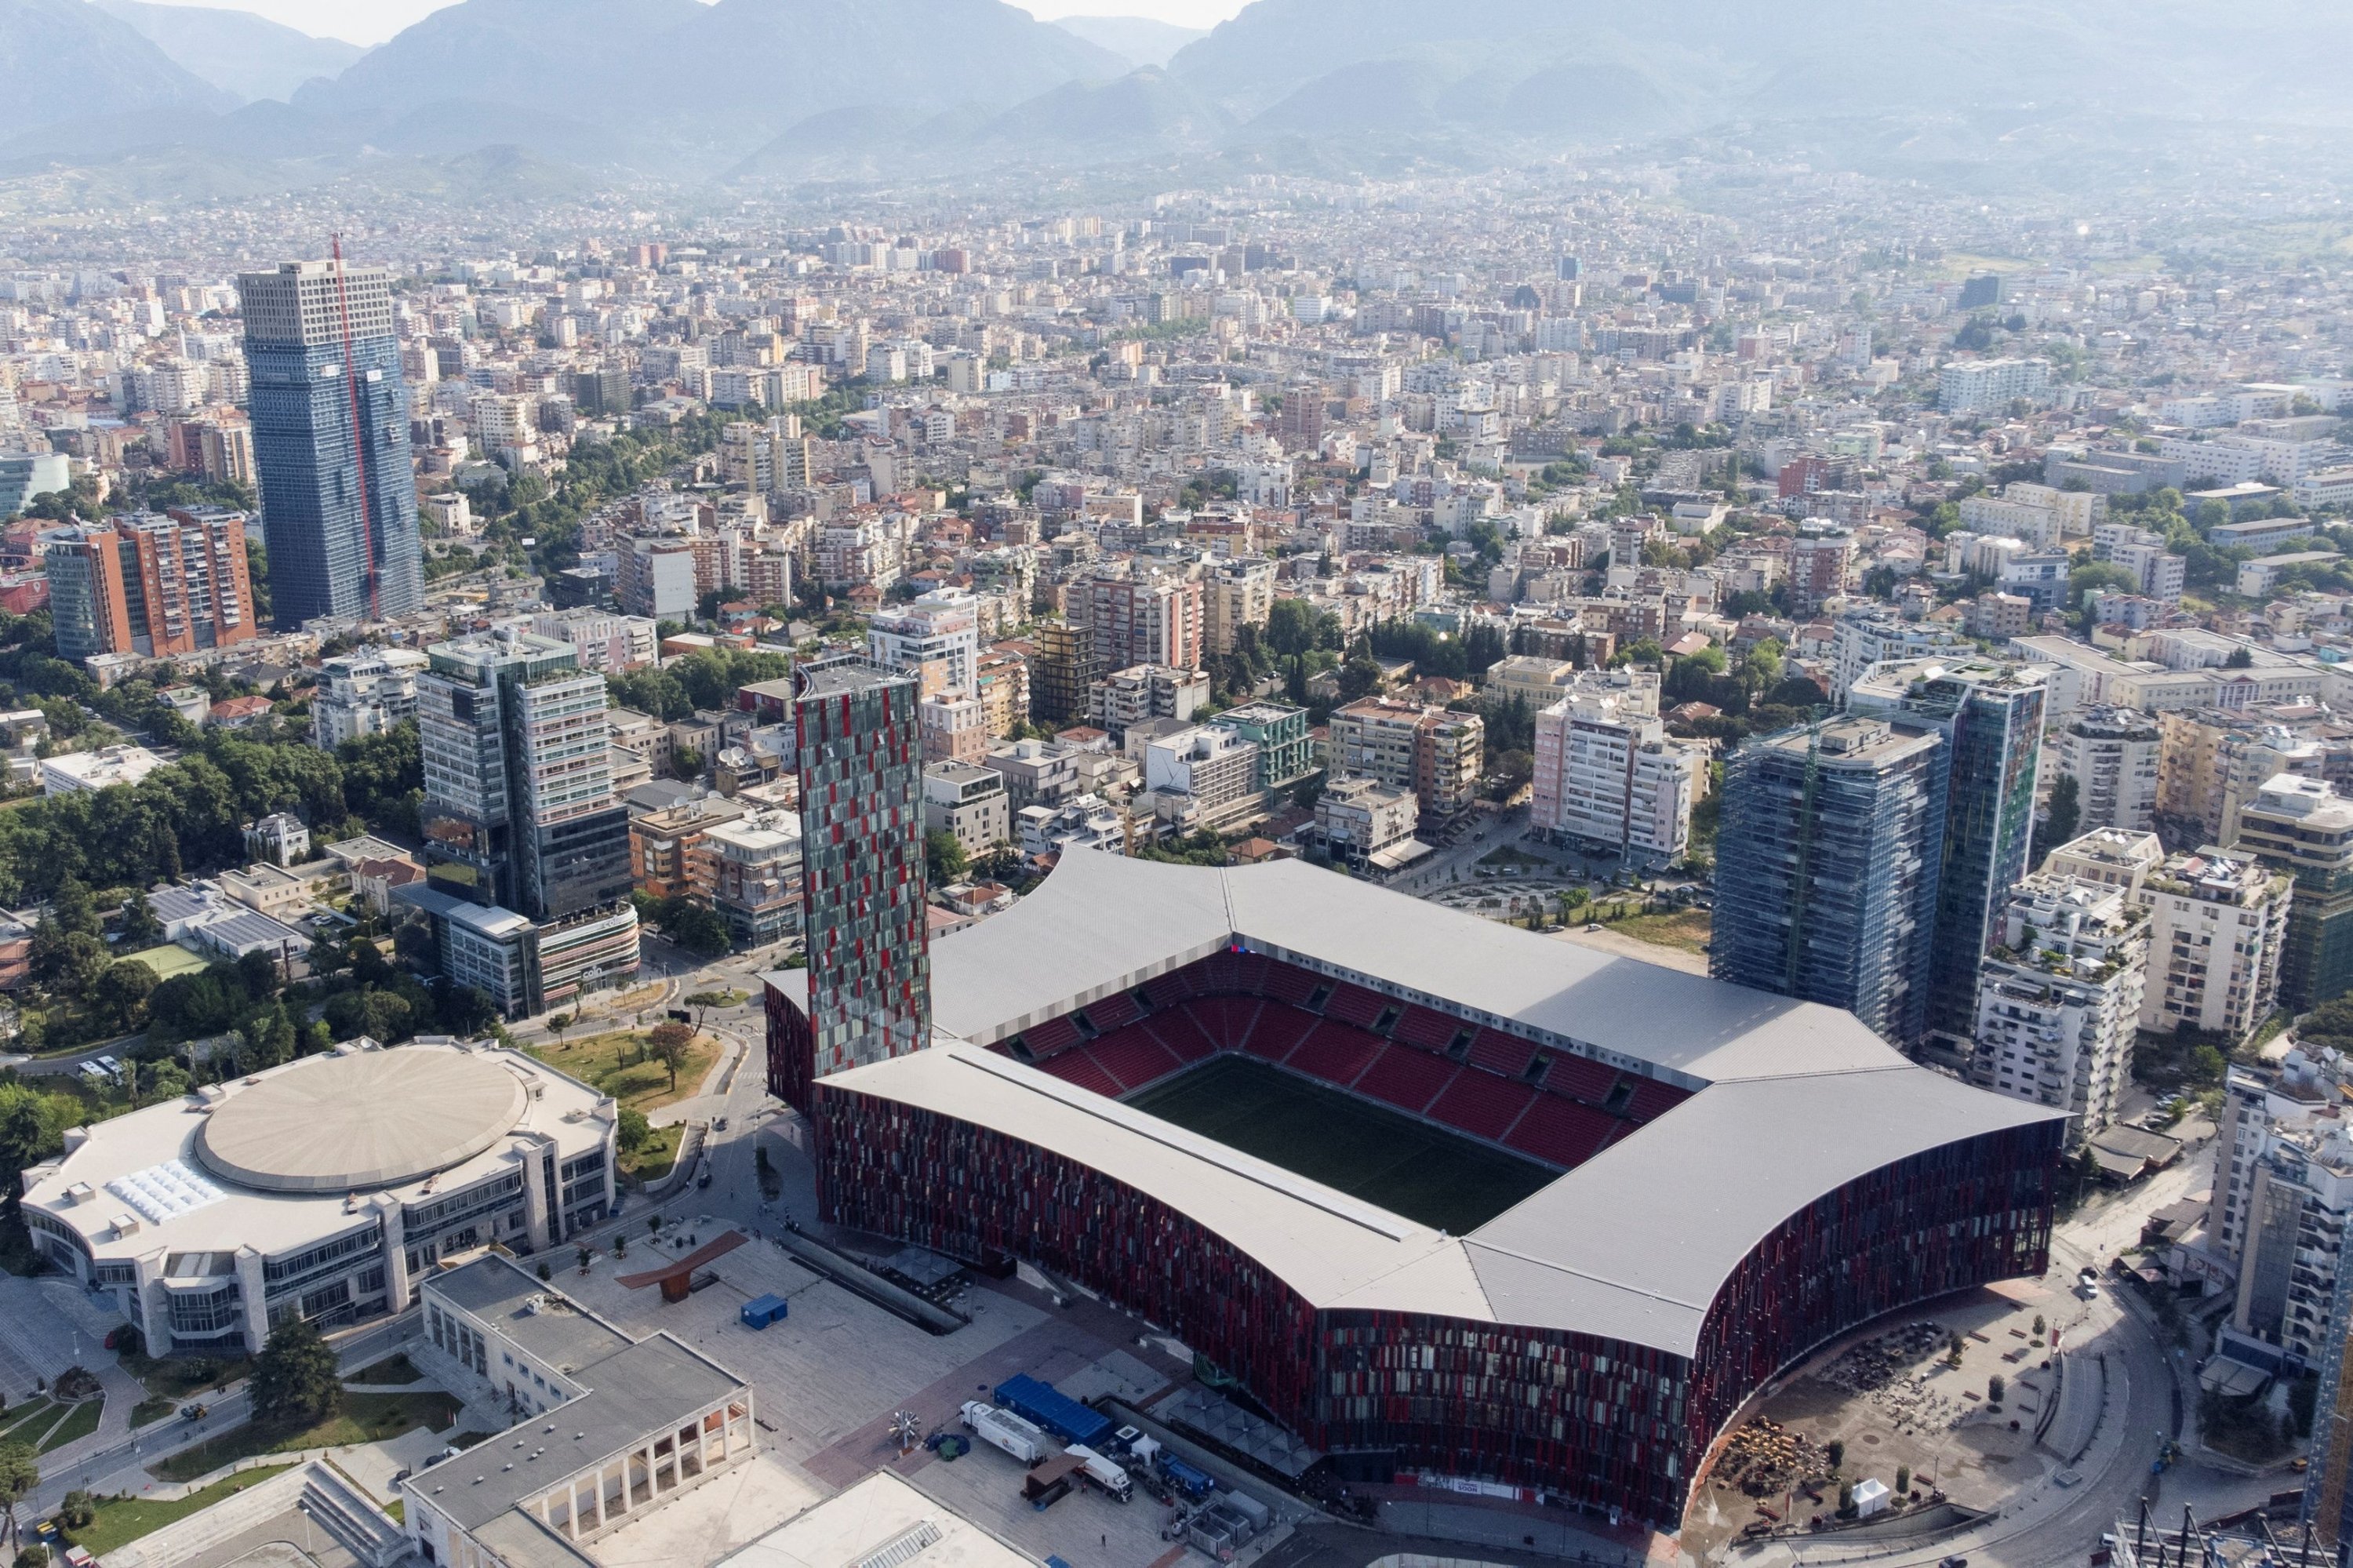 An aerial view of Air Albania stadium which will host the first-ever Europa Conference League final between Roma and Feyenoord, Tirana, Albania, May 22, 2022. (Reuters Photo)